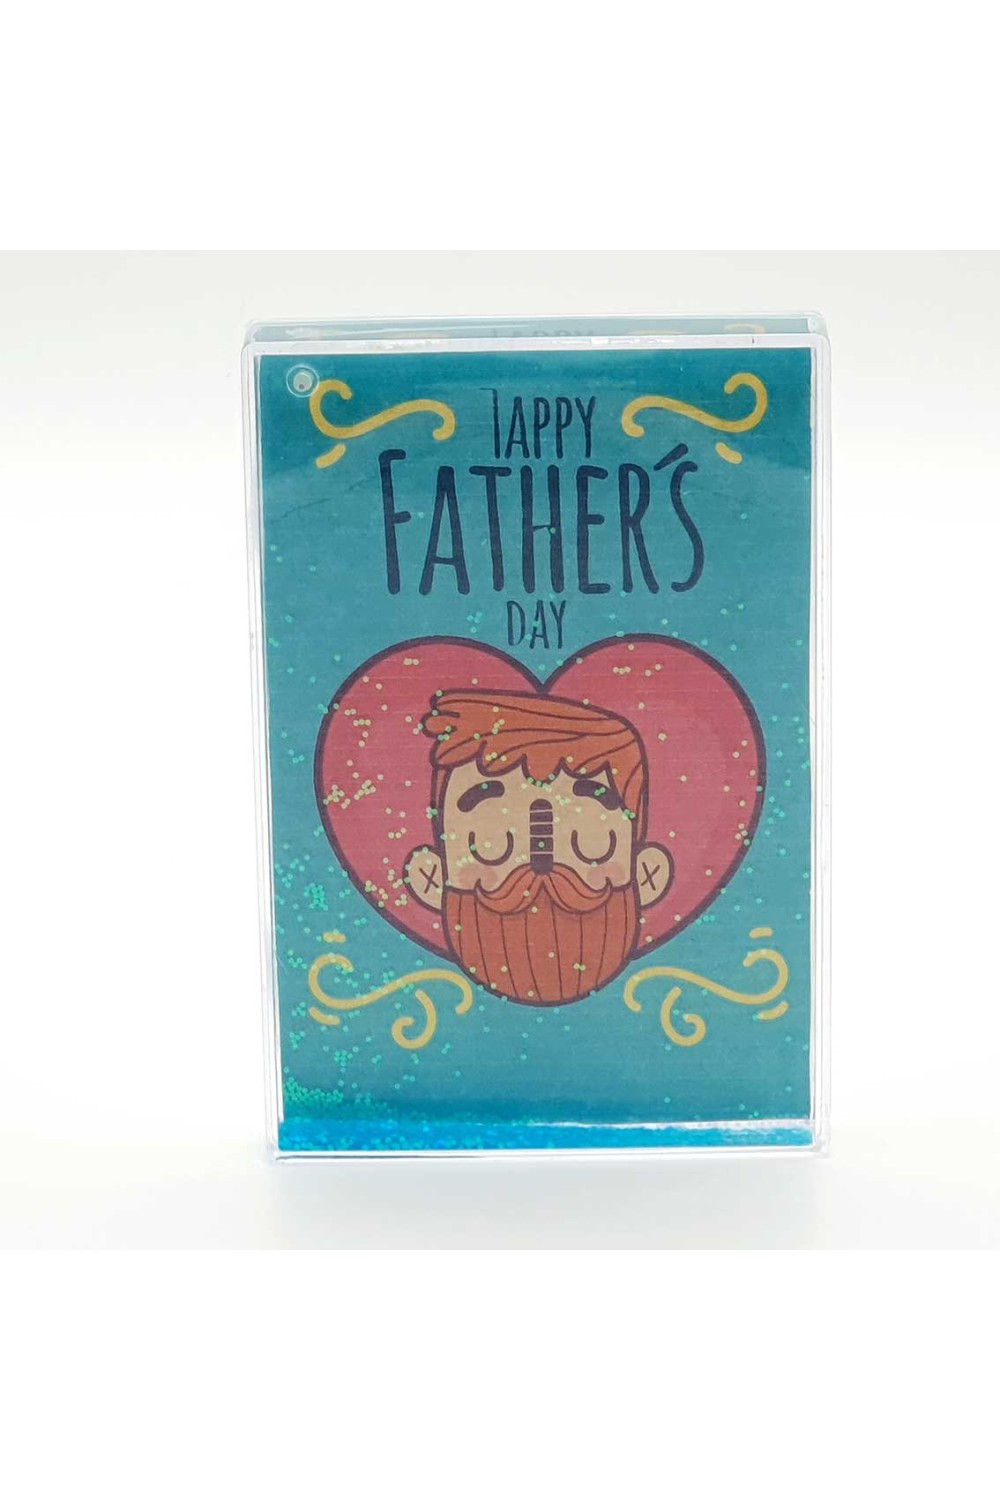 Happy Father's Day - Glitter Frame 1